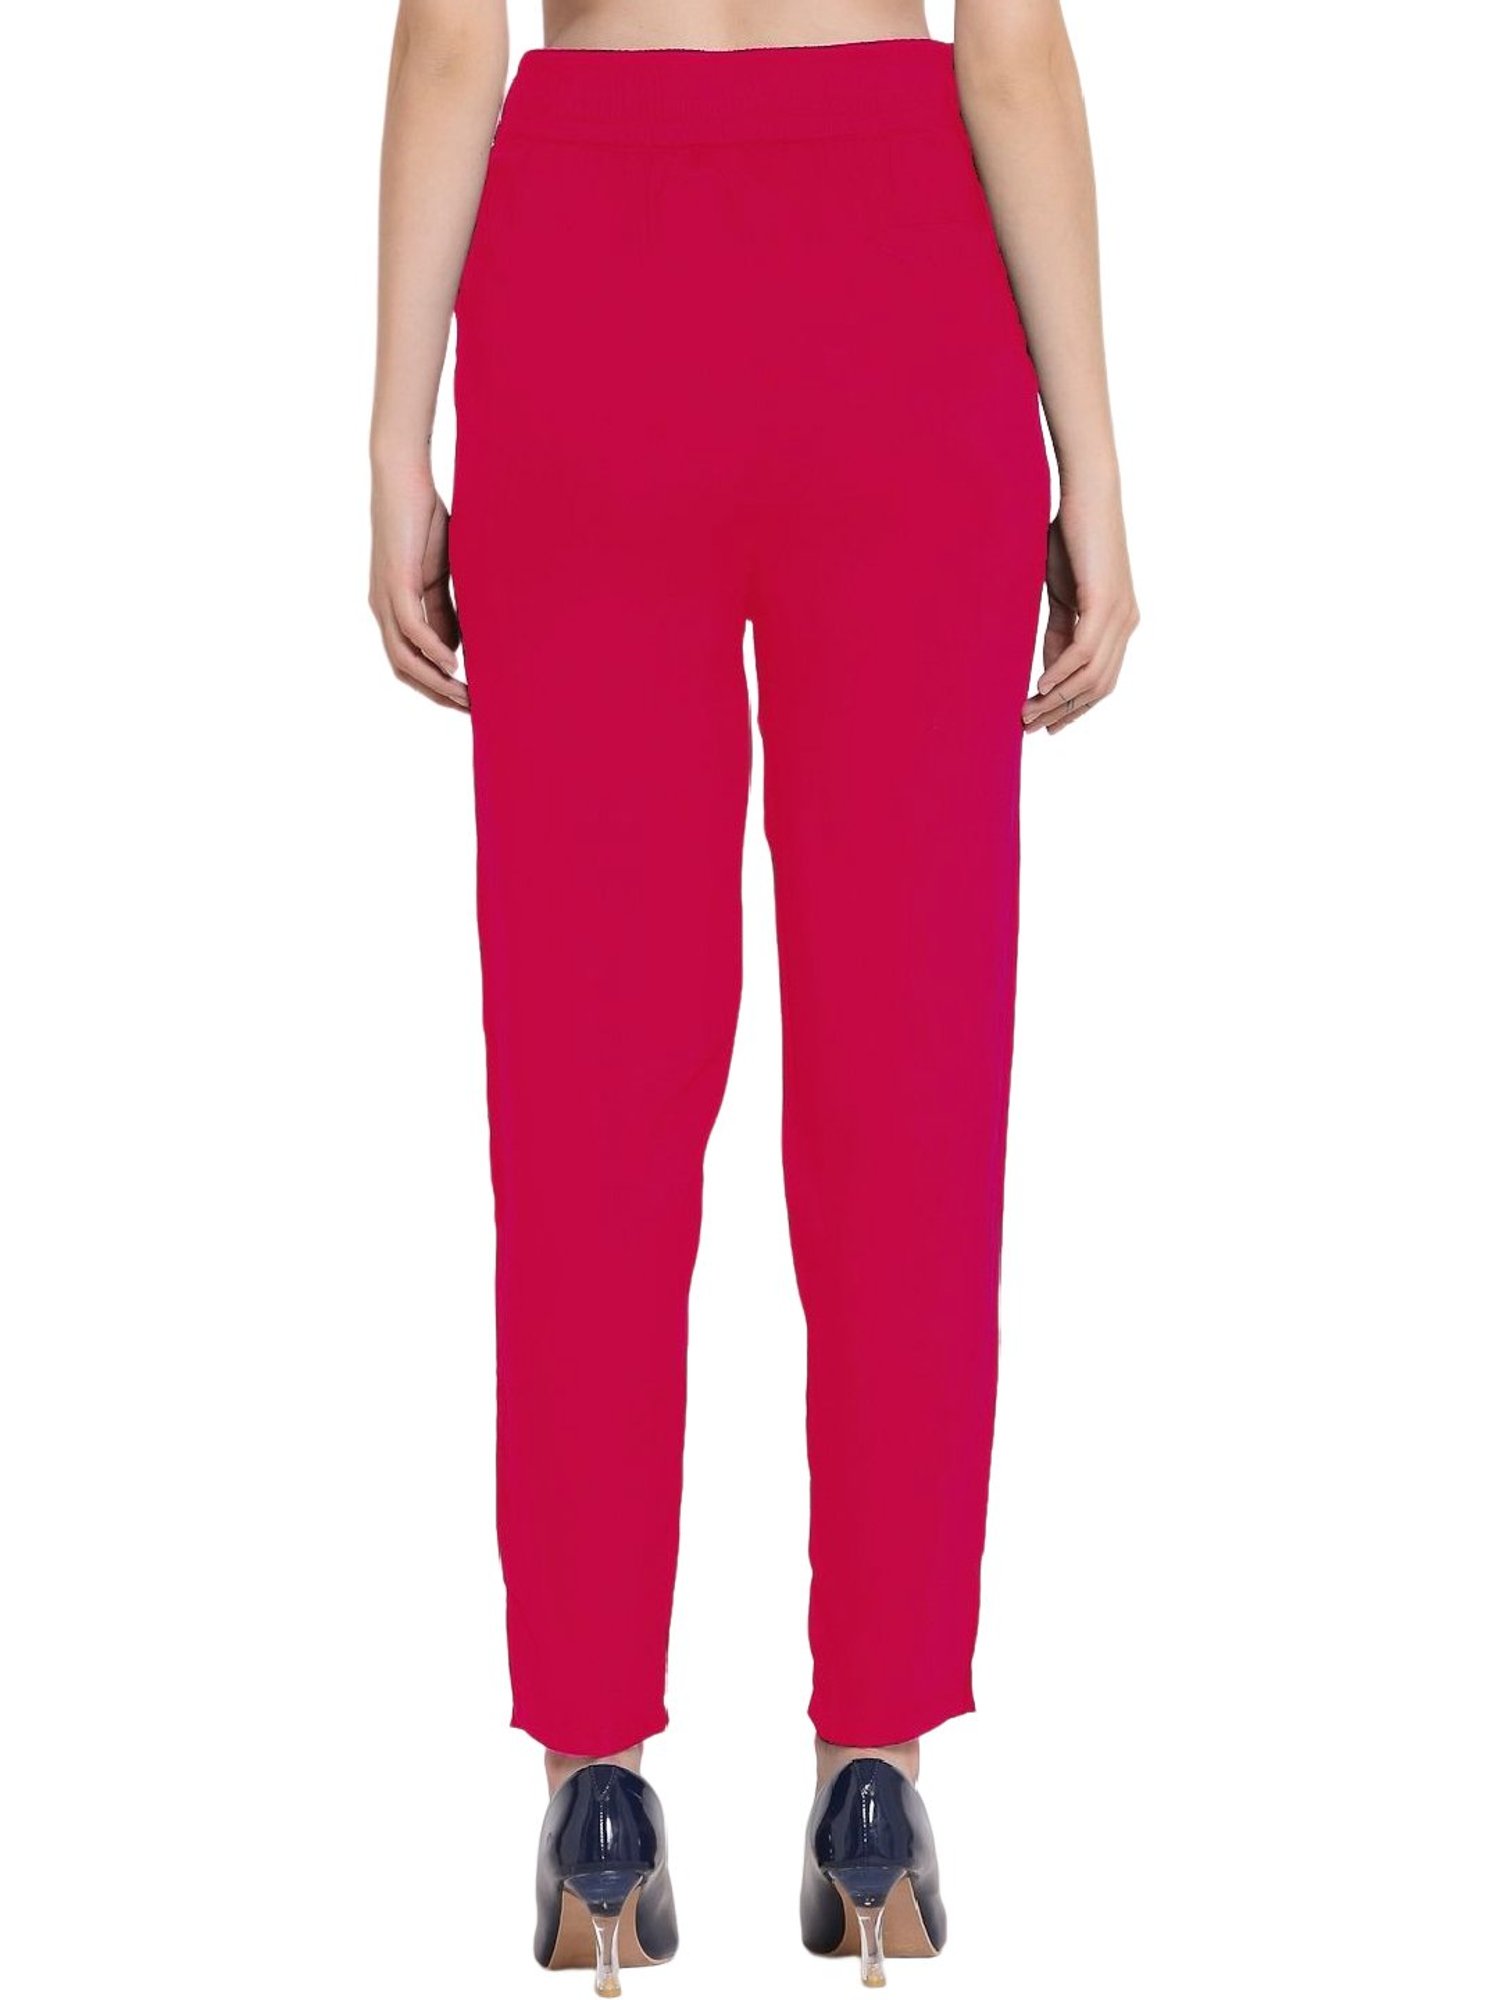 Stealing The Show High Waist Trousers In Hot Pink  Summer pants outfits  Pink pants outfit Clothes